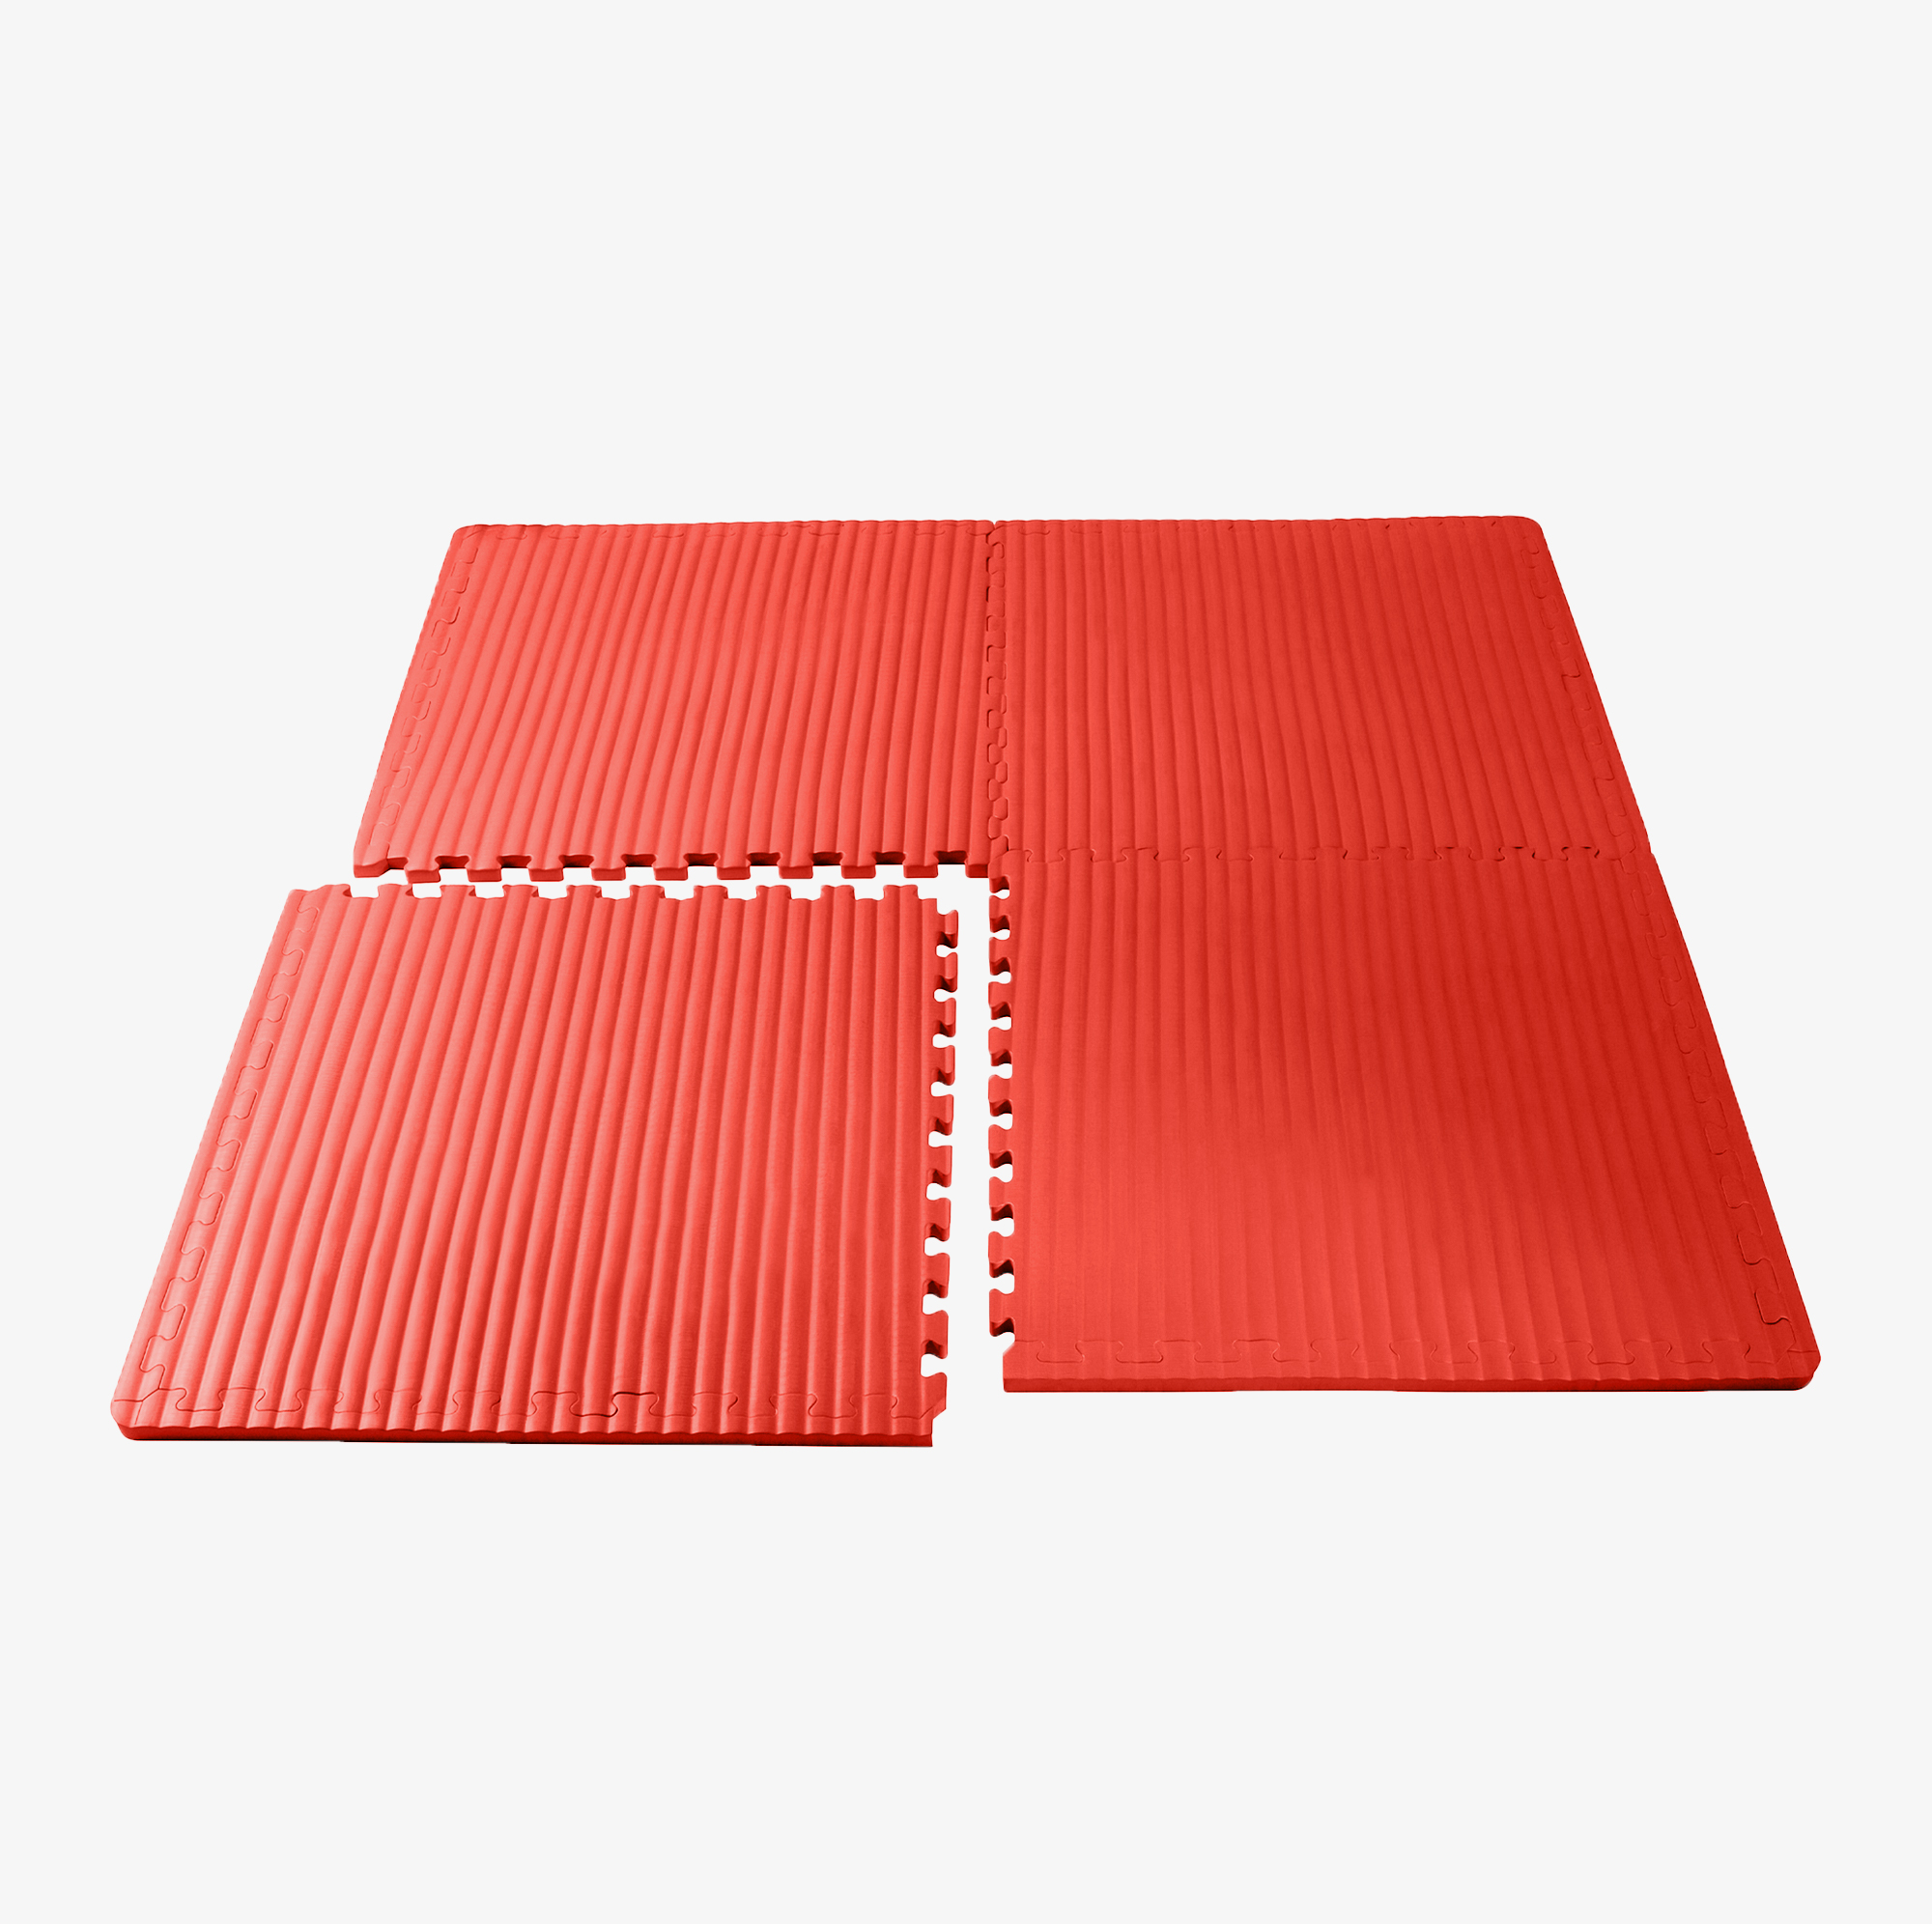 We Sell Mats 1 Inch Thick Martial Arts EVA Foam Exercise Mat, Tatami Pattern, Interlocking Floor Tiles for Home Gym, MMA, Anti-Fatigue Mats, 24 in x 24 in - image 5 of 9